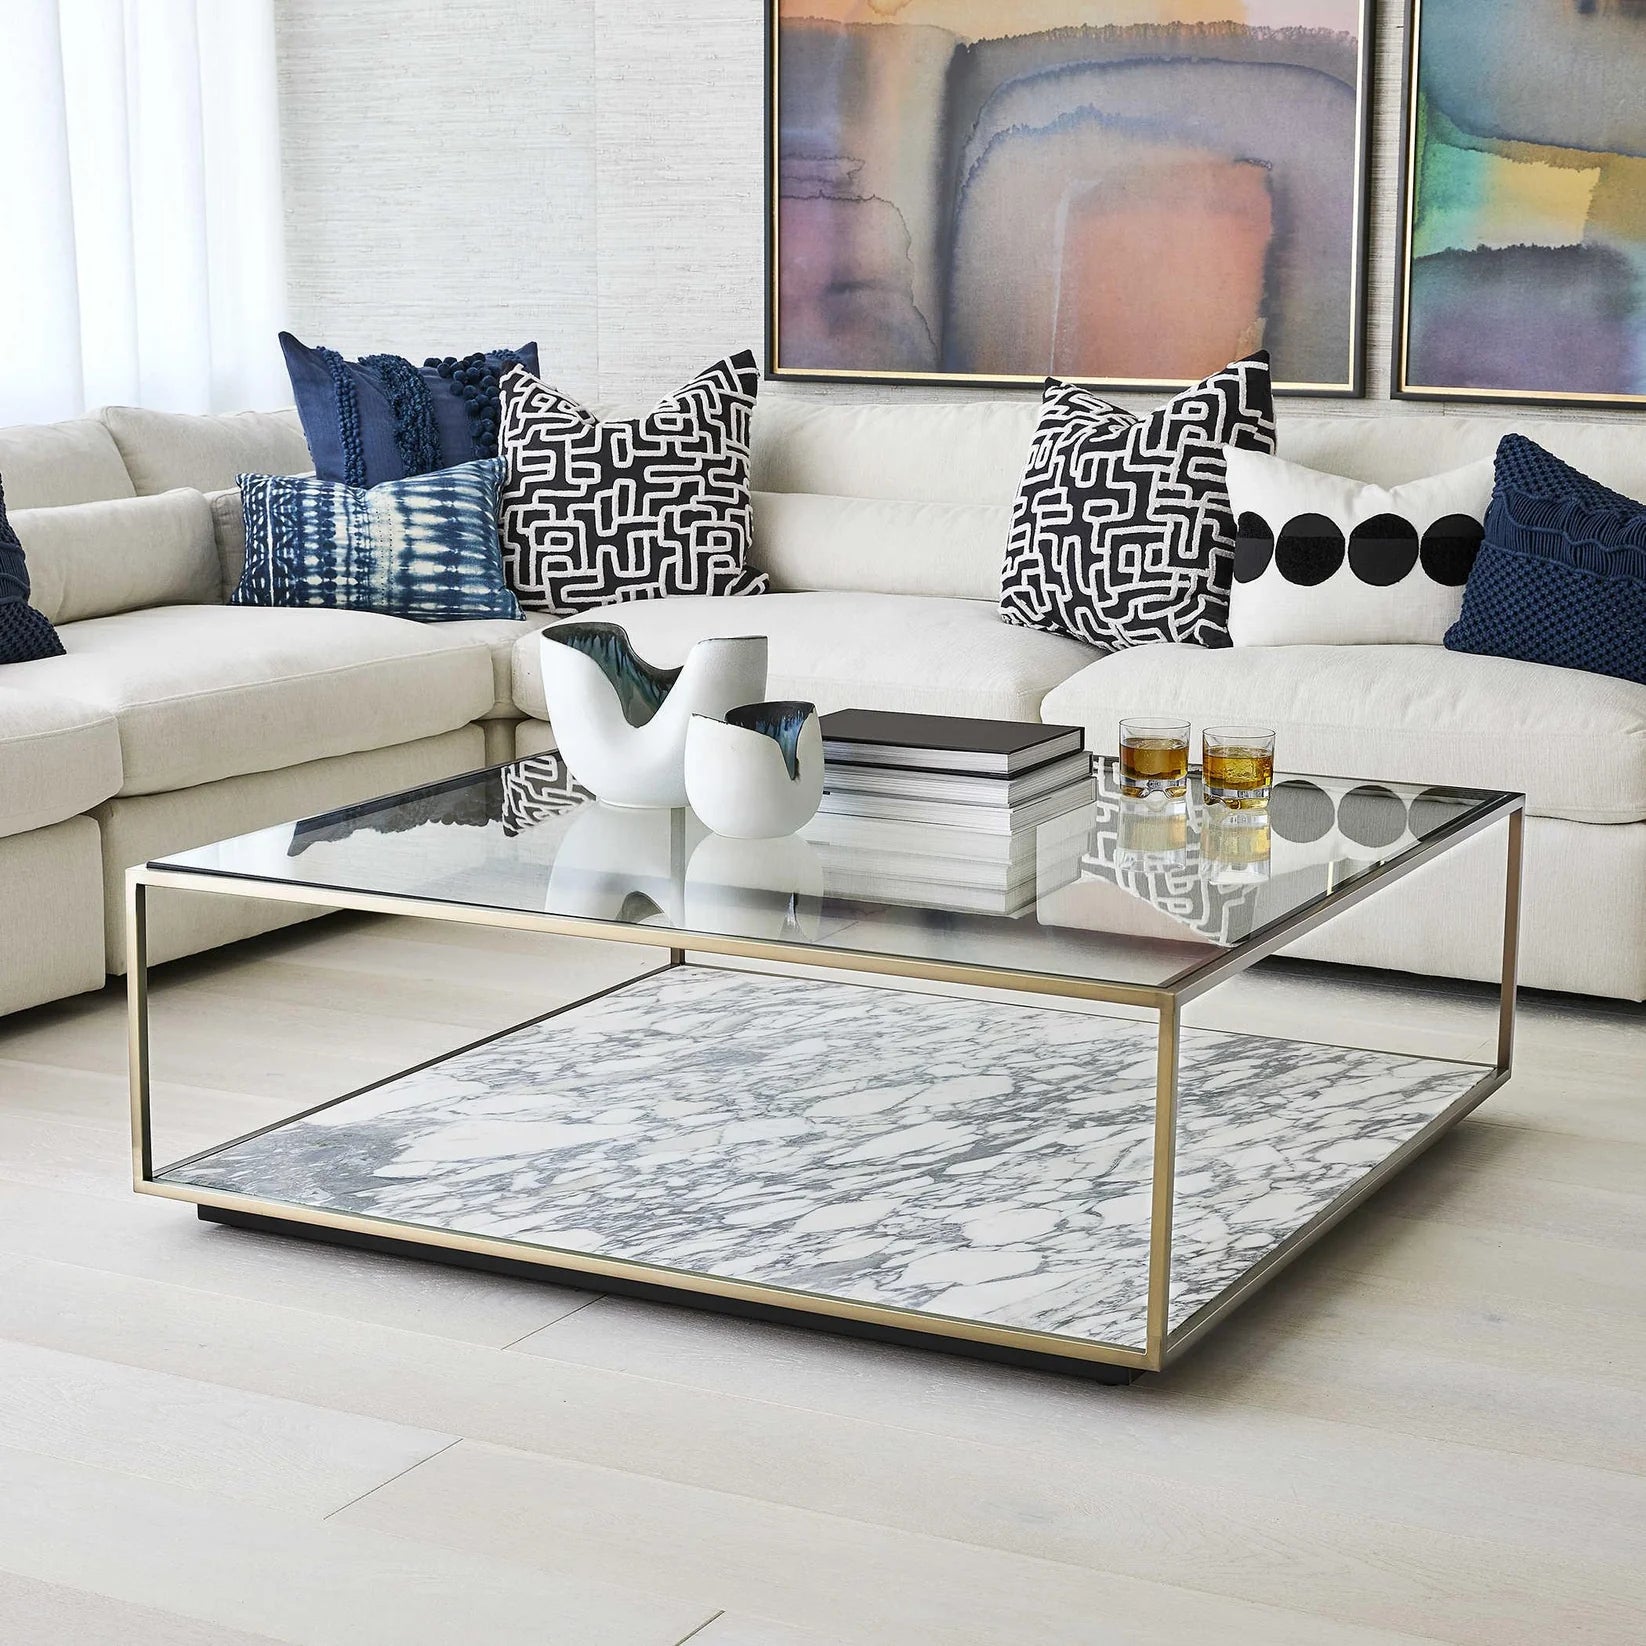 Interior Designer Tips for Styling Your Coffee Table